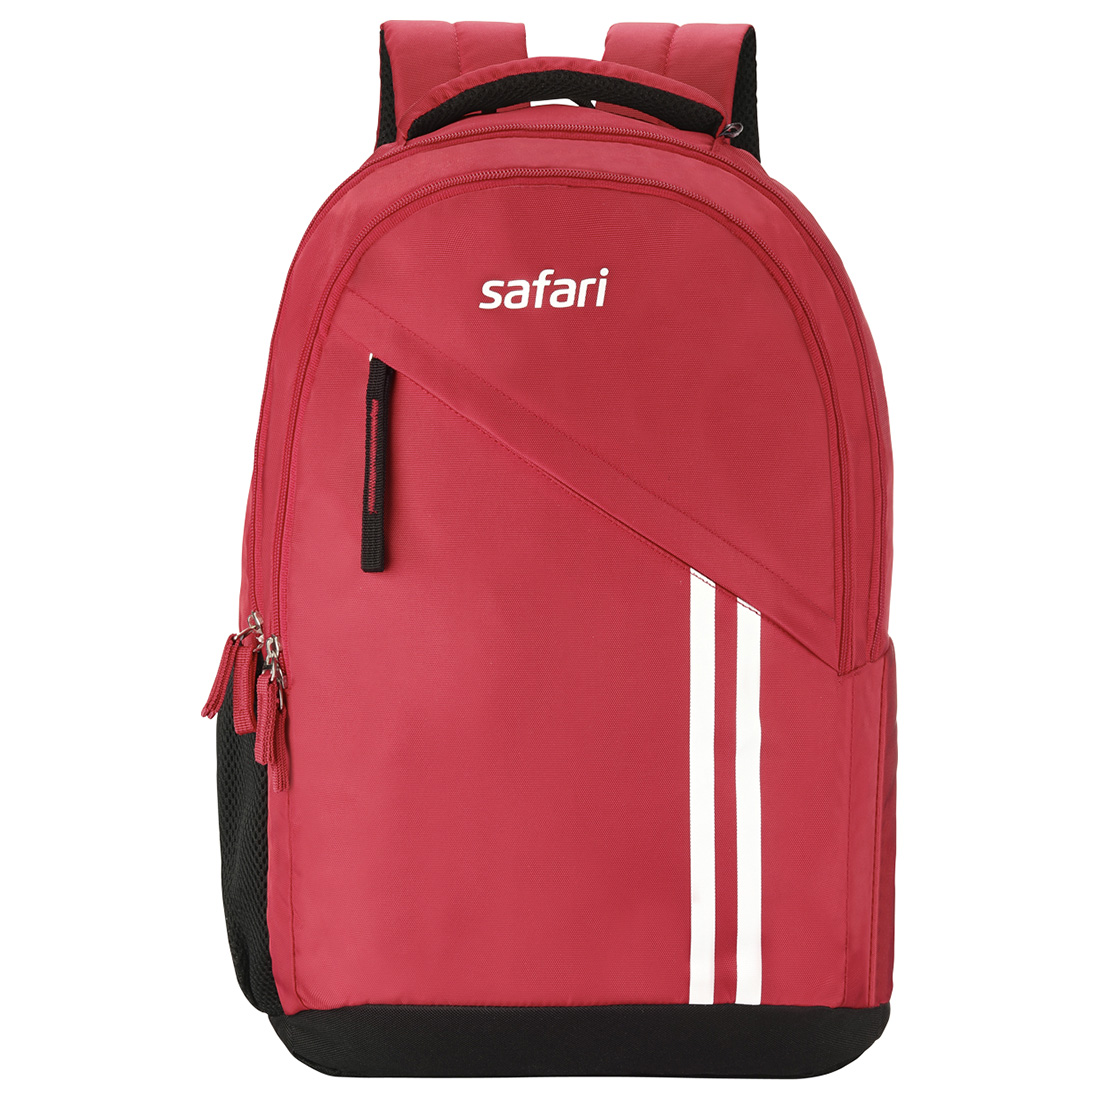 Buy Safari Sport Red Casual Backpack Bag Online @ ₹1878 from ShopClues